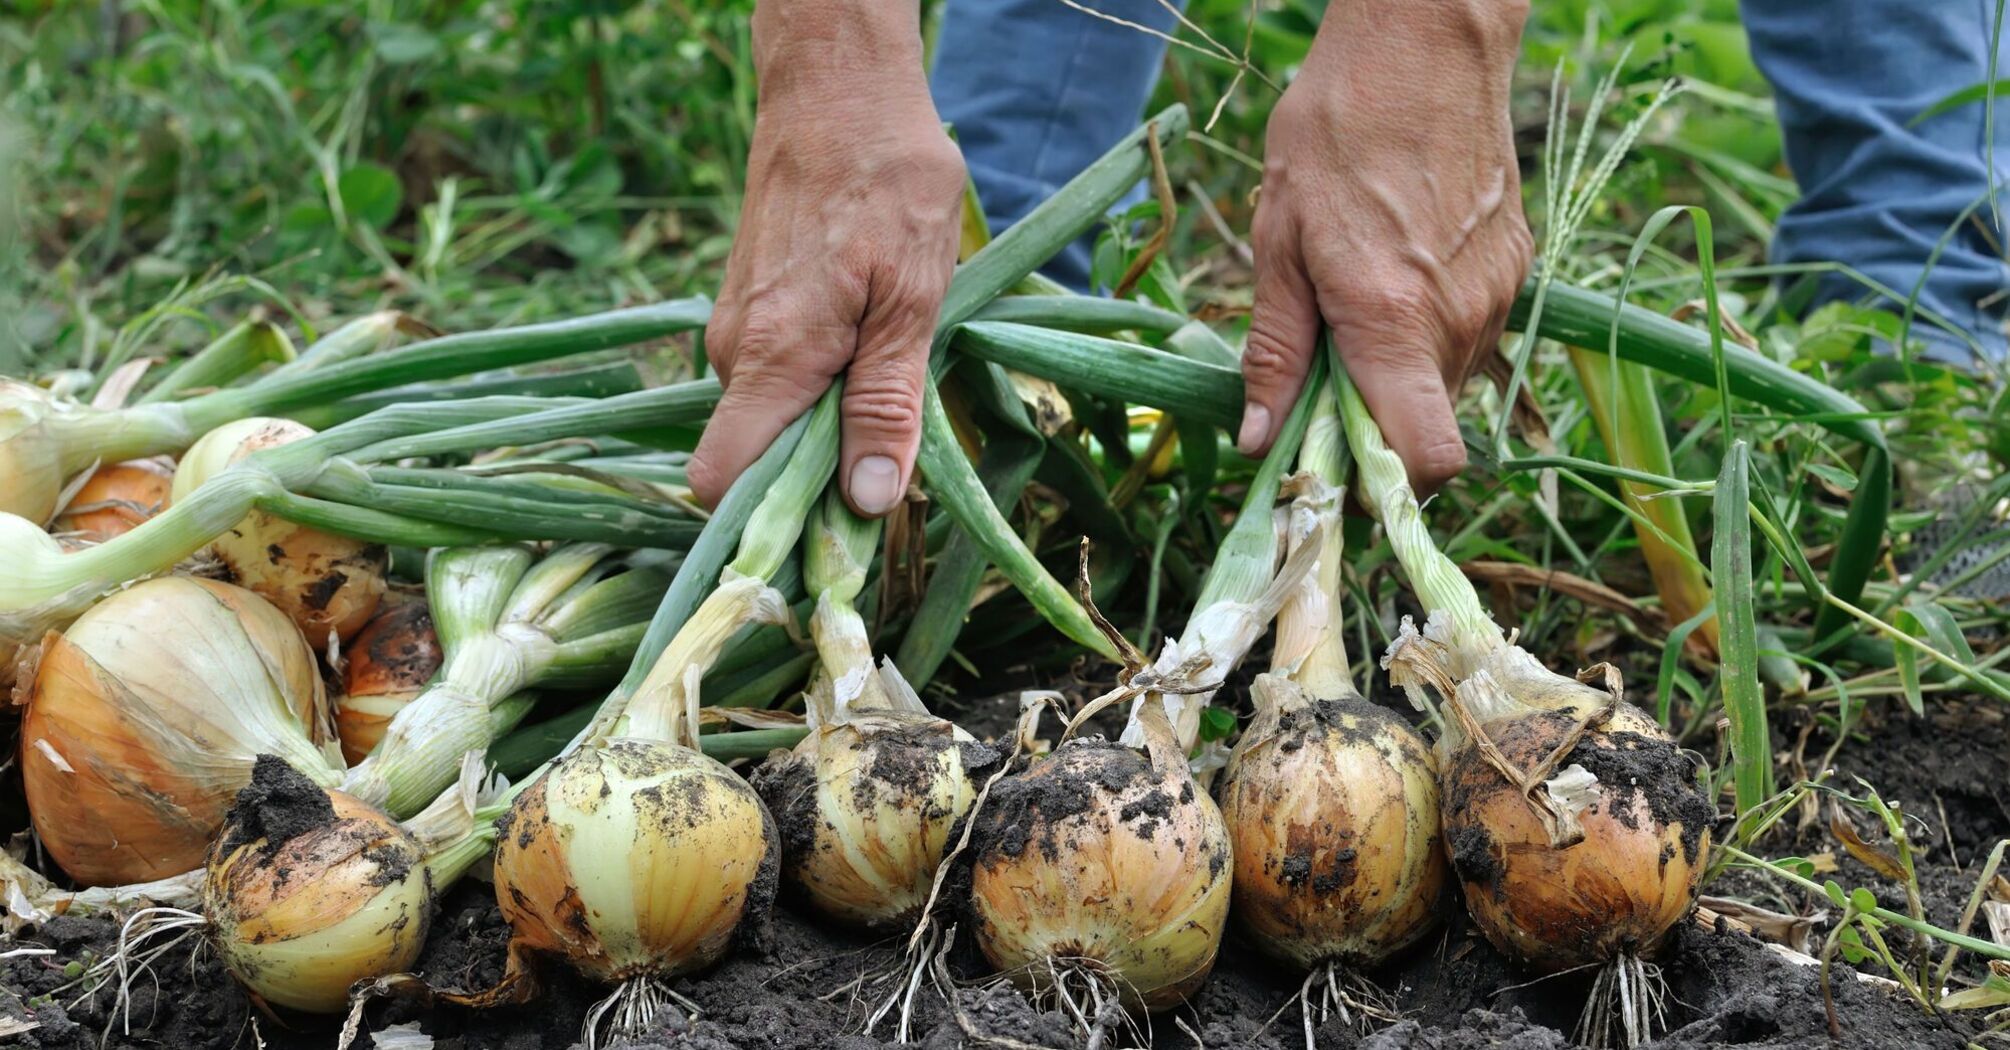 Plant these plants next to onions